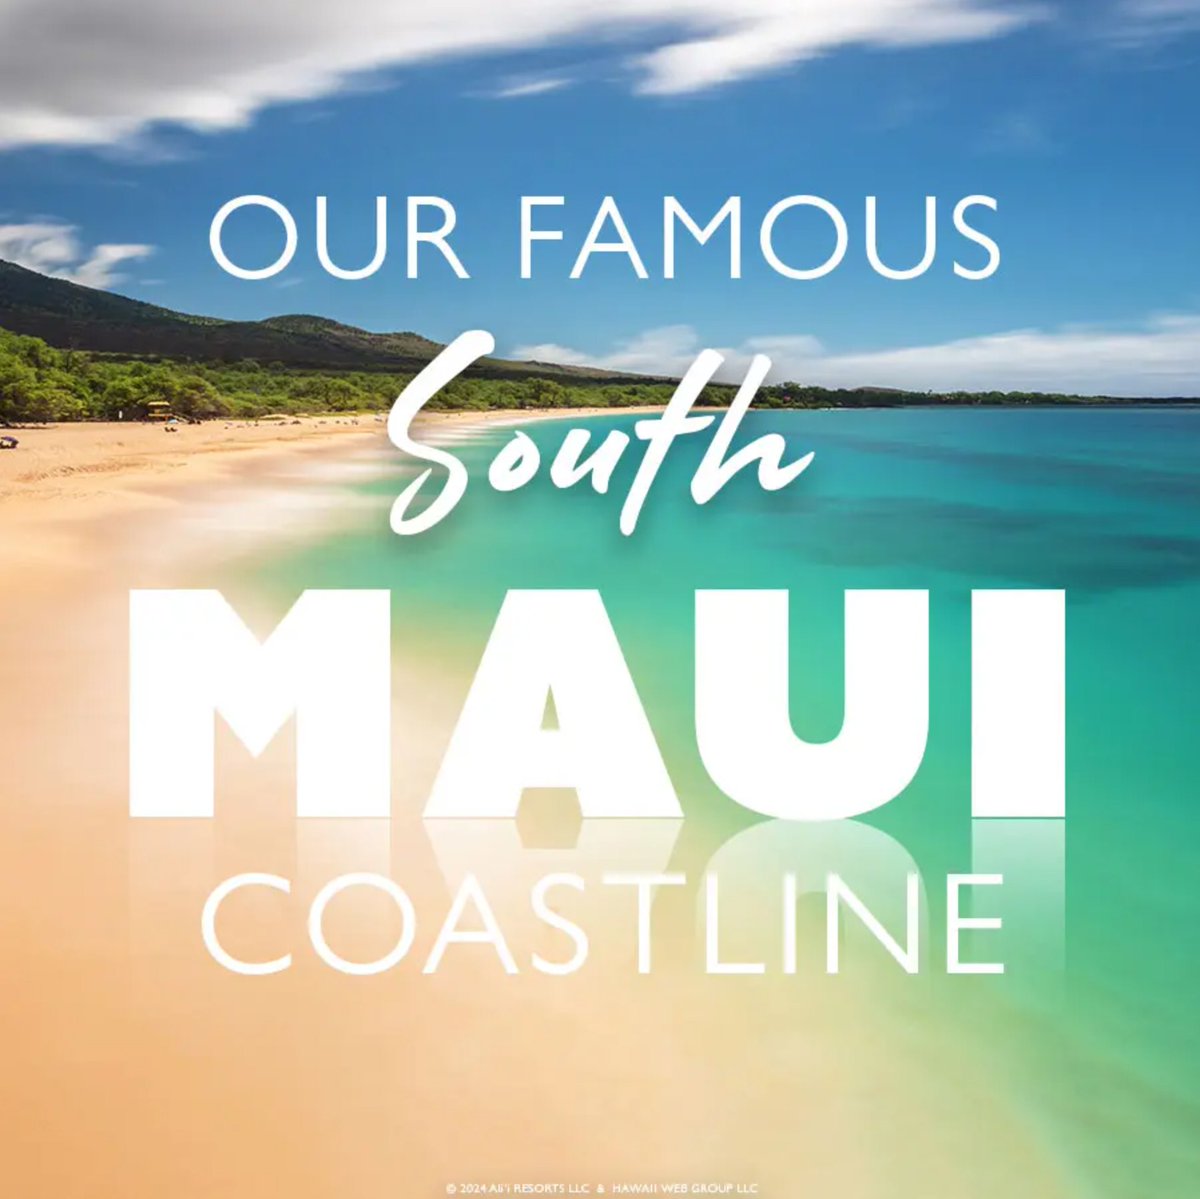 Famous South Maui Coastline
aliiresorts.com/blog/famous-so…

Our South #Maui region, renowned for its raw natural beauty, presents a stunning juxtaposition of rugged coastlines and pristine beaches, shaping a unique landscape. via @AliiResorts